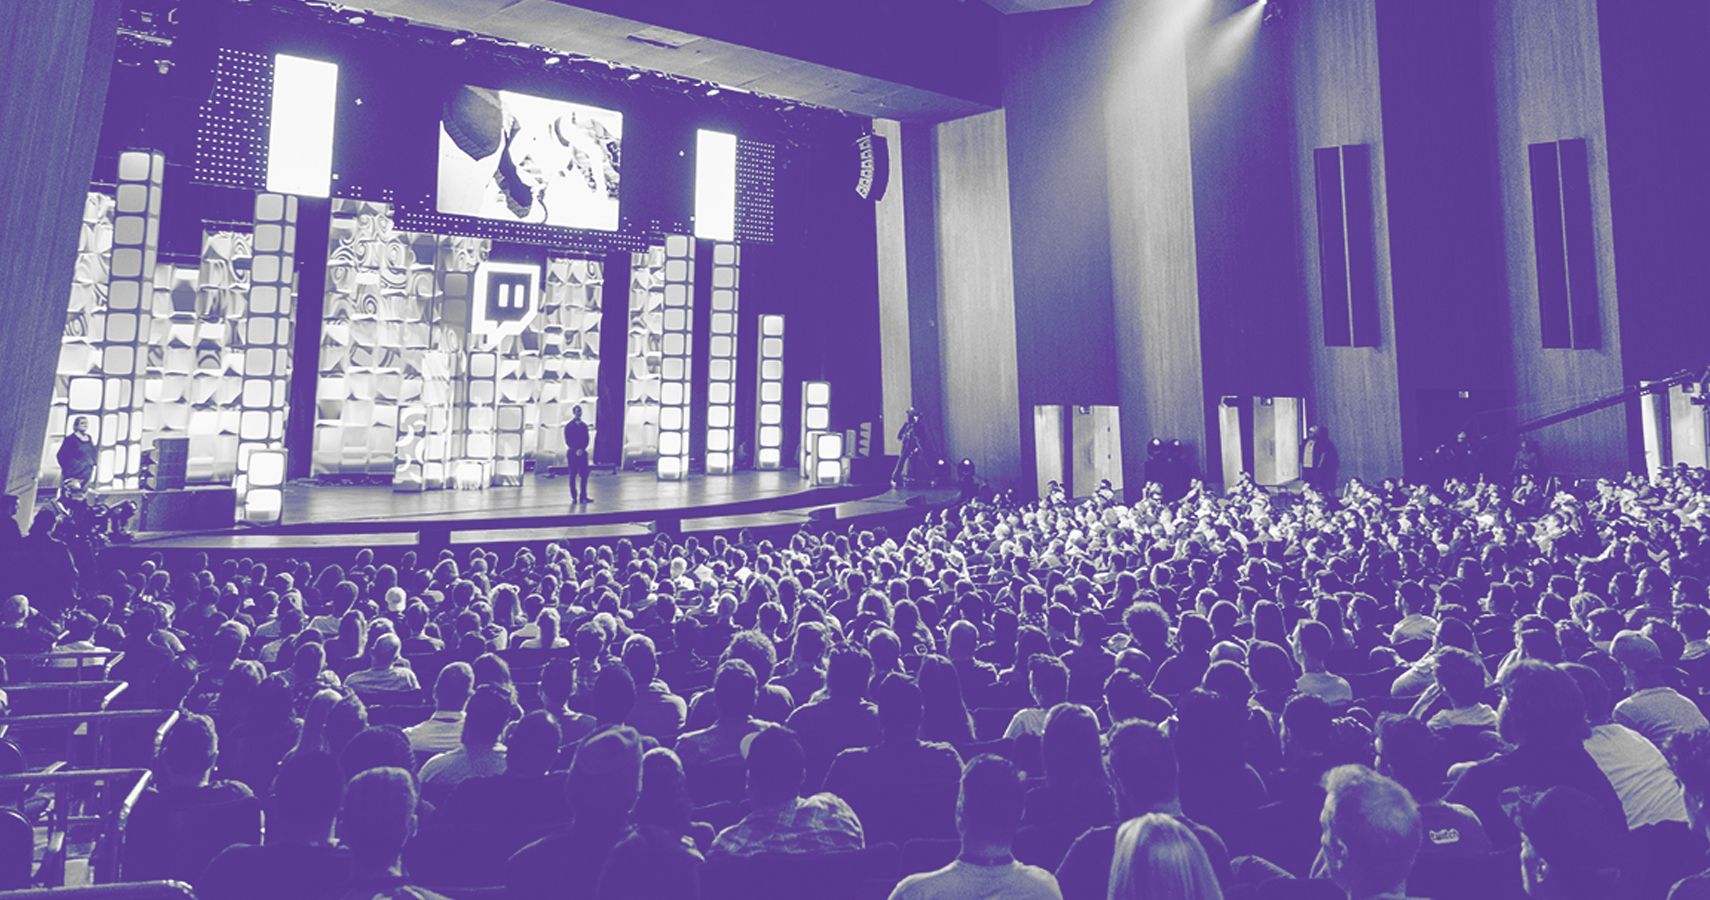 A purple-tinted image of the audience at a Twitch event.